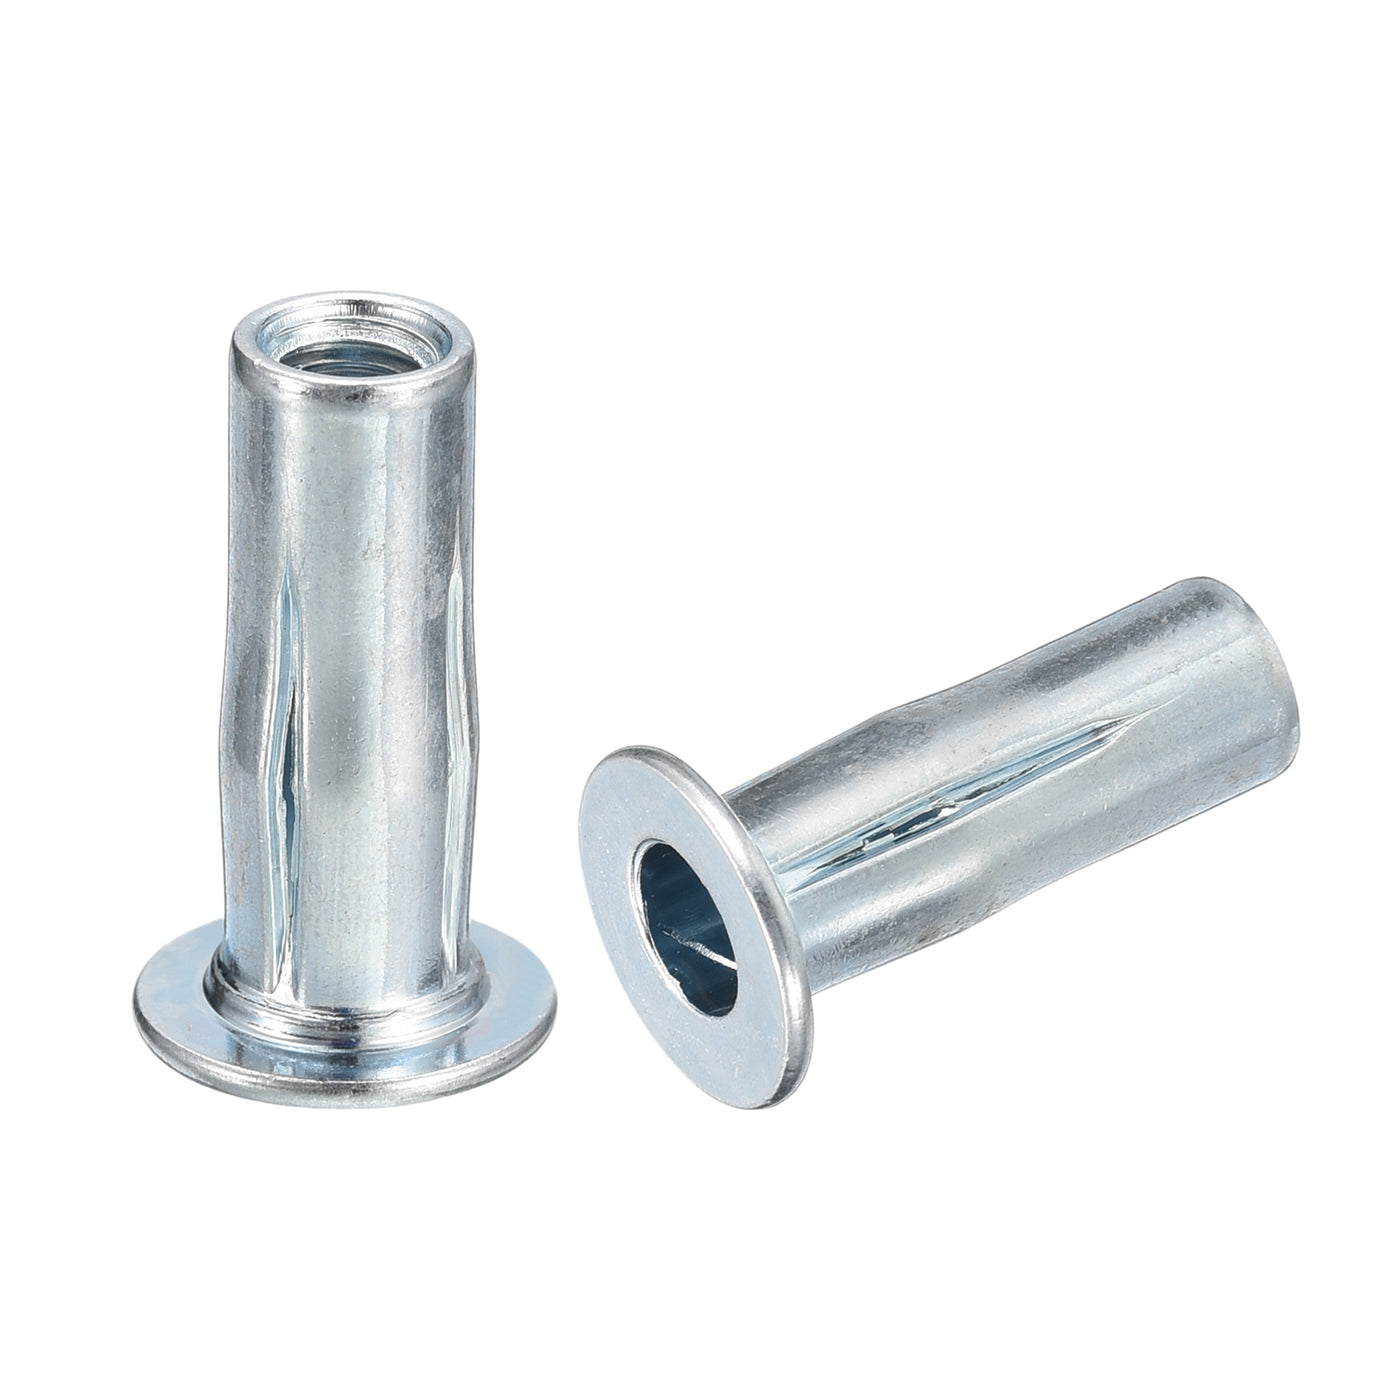 uxcell Uxcell Multi-Grip Rivet Nuts, Pre-Bulbed Shank Flat Head Threaded Insert Nut Carbon Steel Plus Nuts